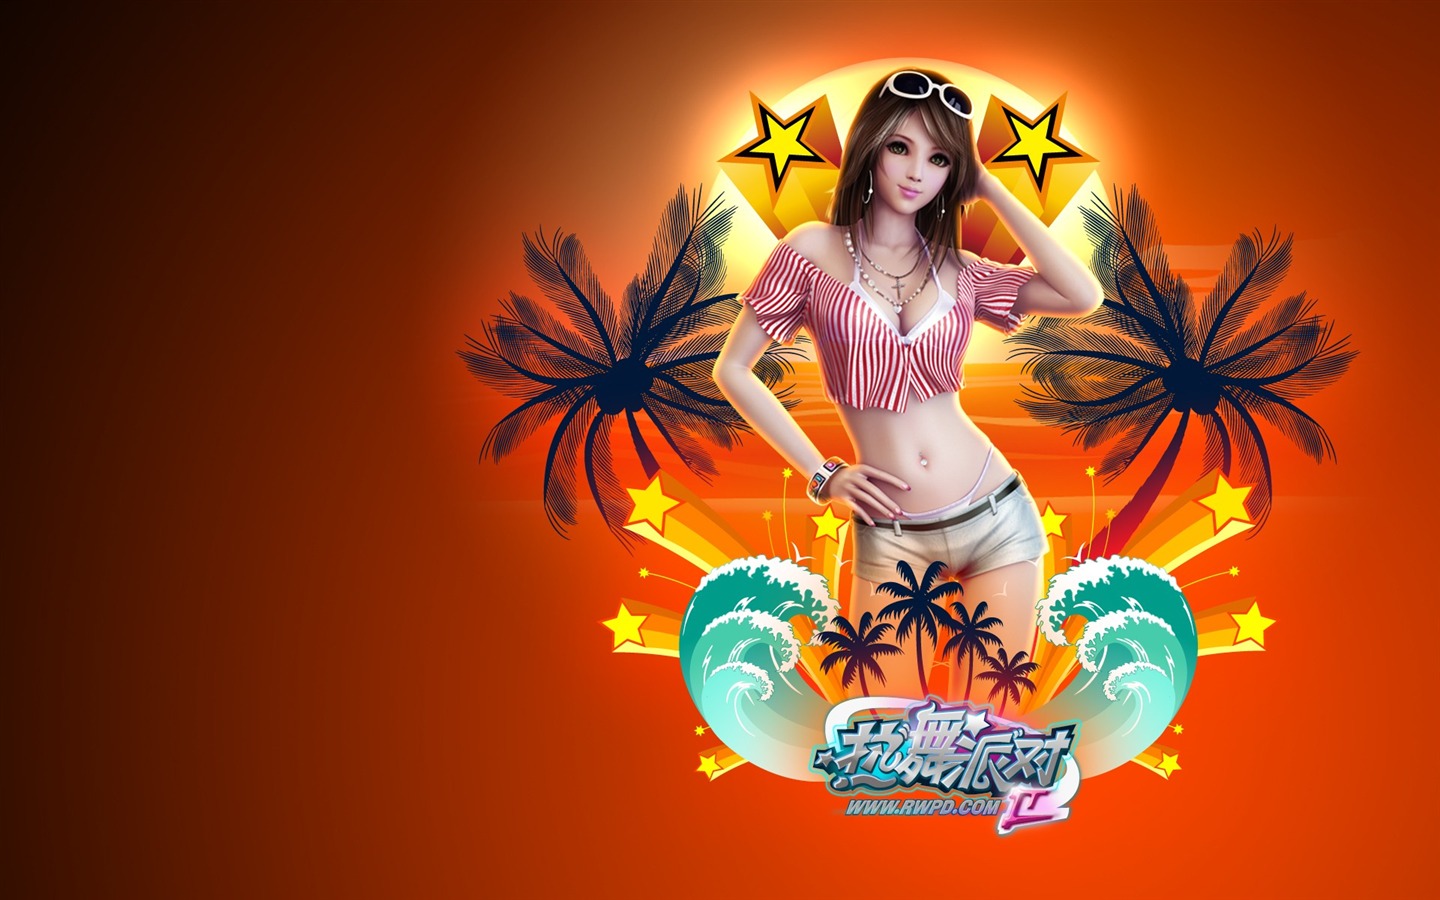 Online game Hot Dance Party II official wallpapers #3 - 1440x900